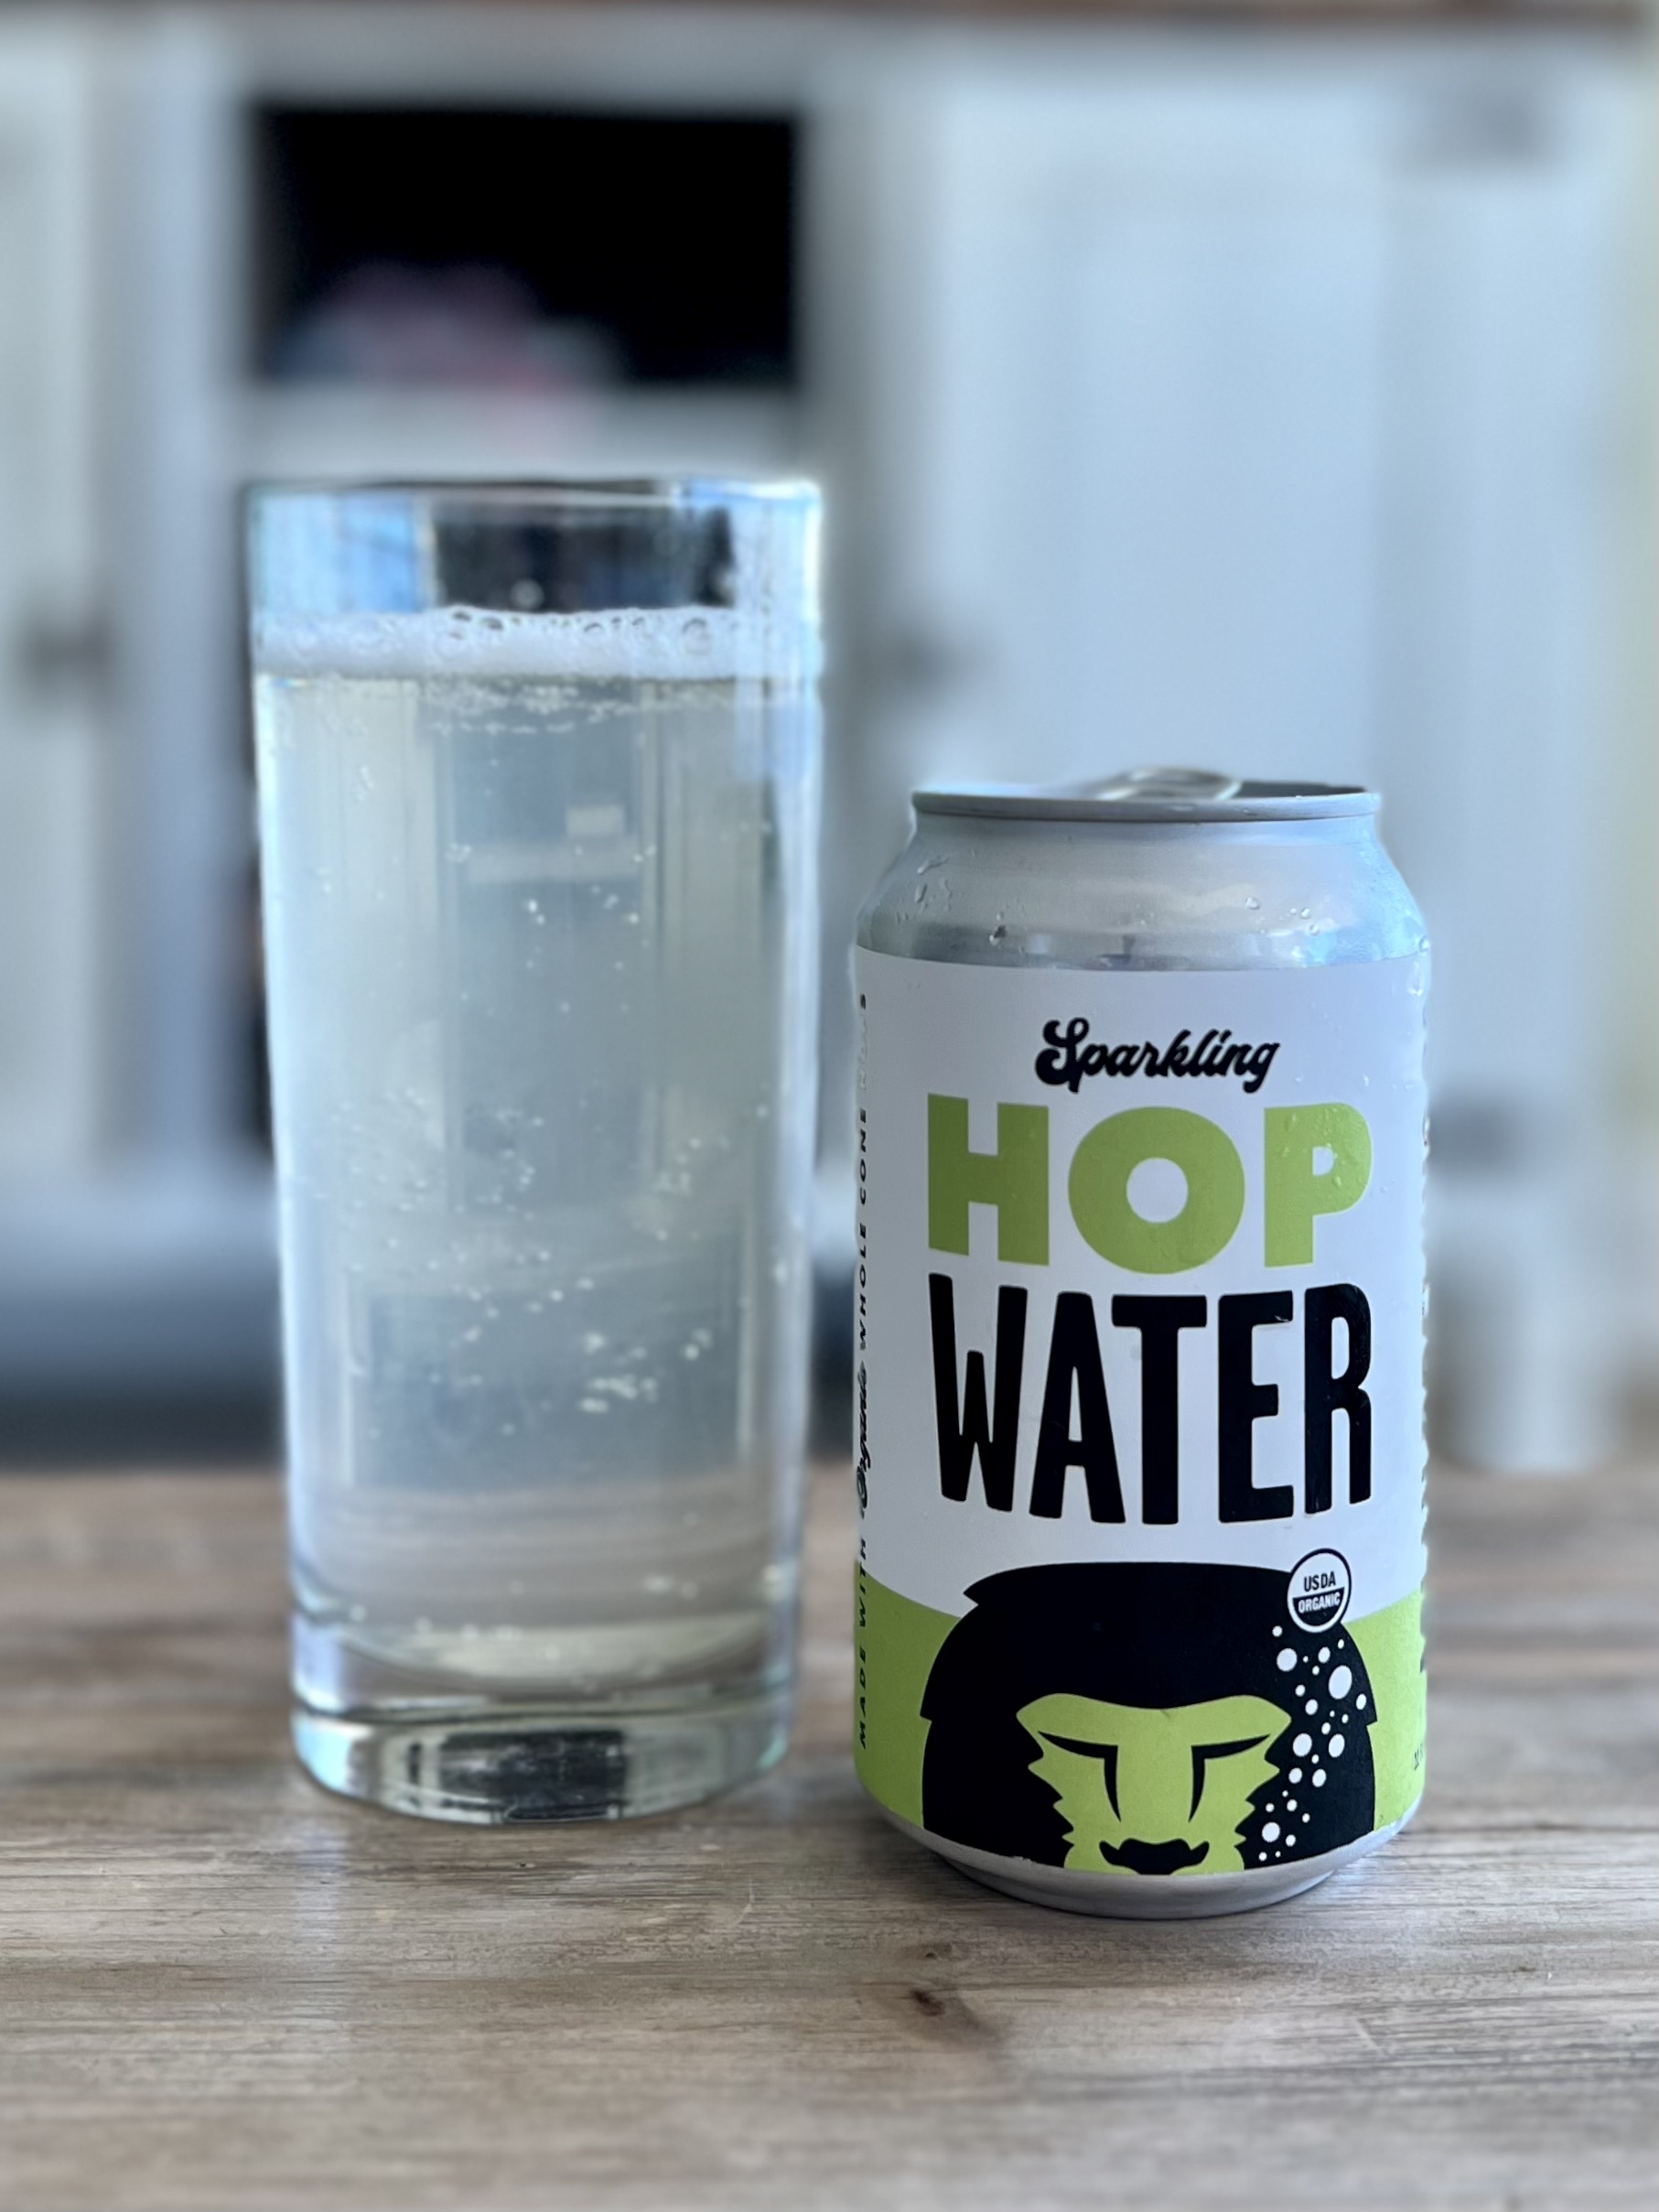 A refreshing glass of Sparkling Hop Water from Aslan Brewing.